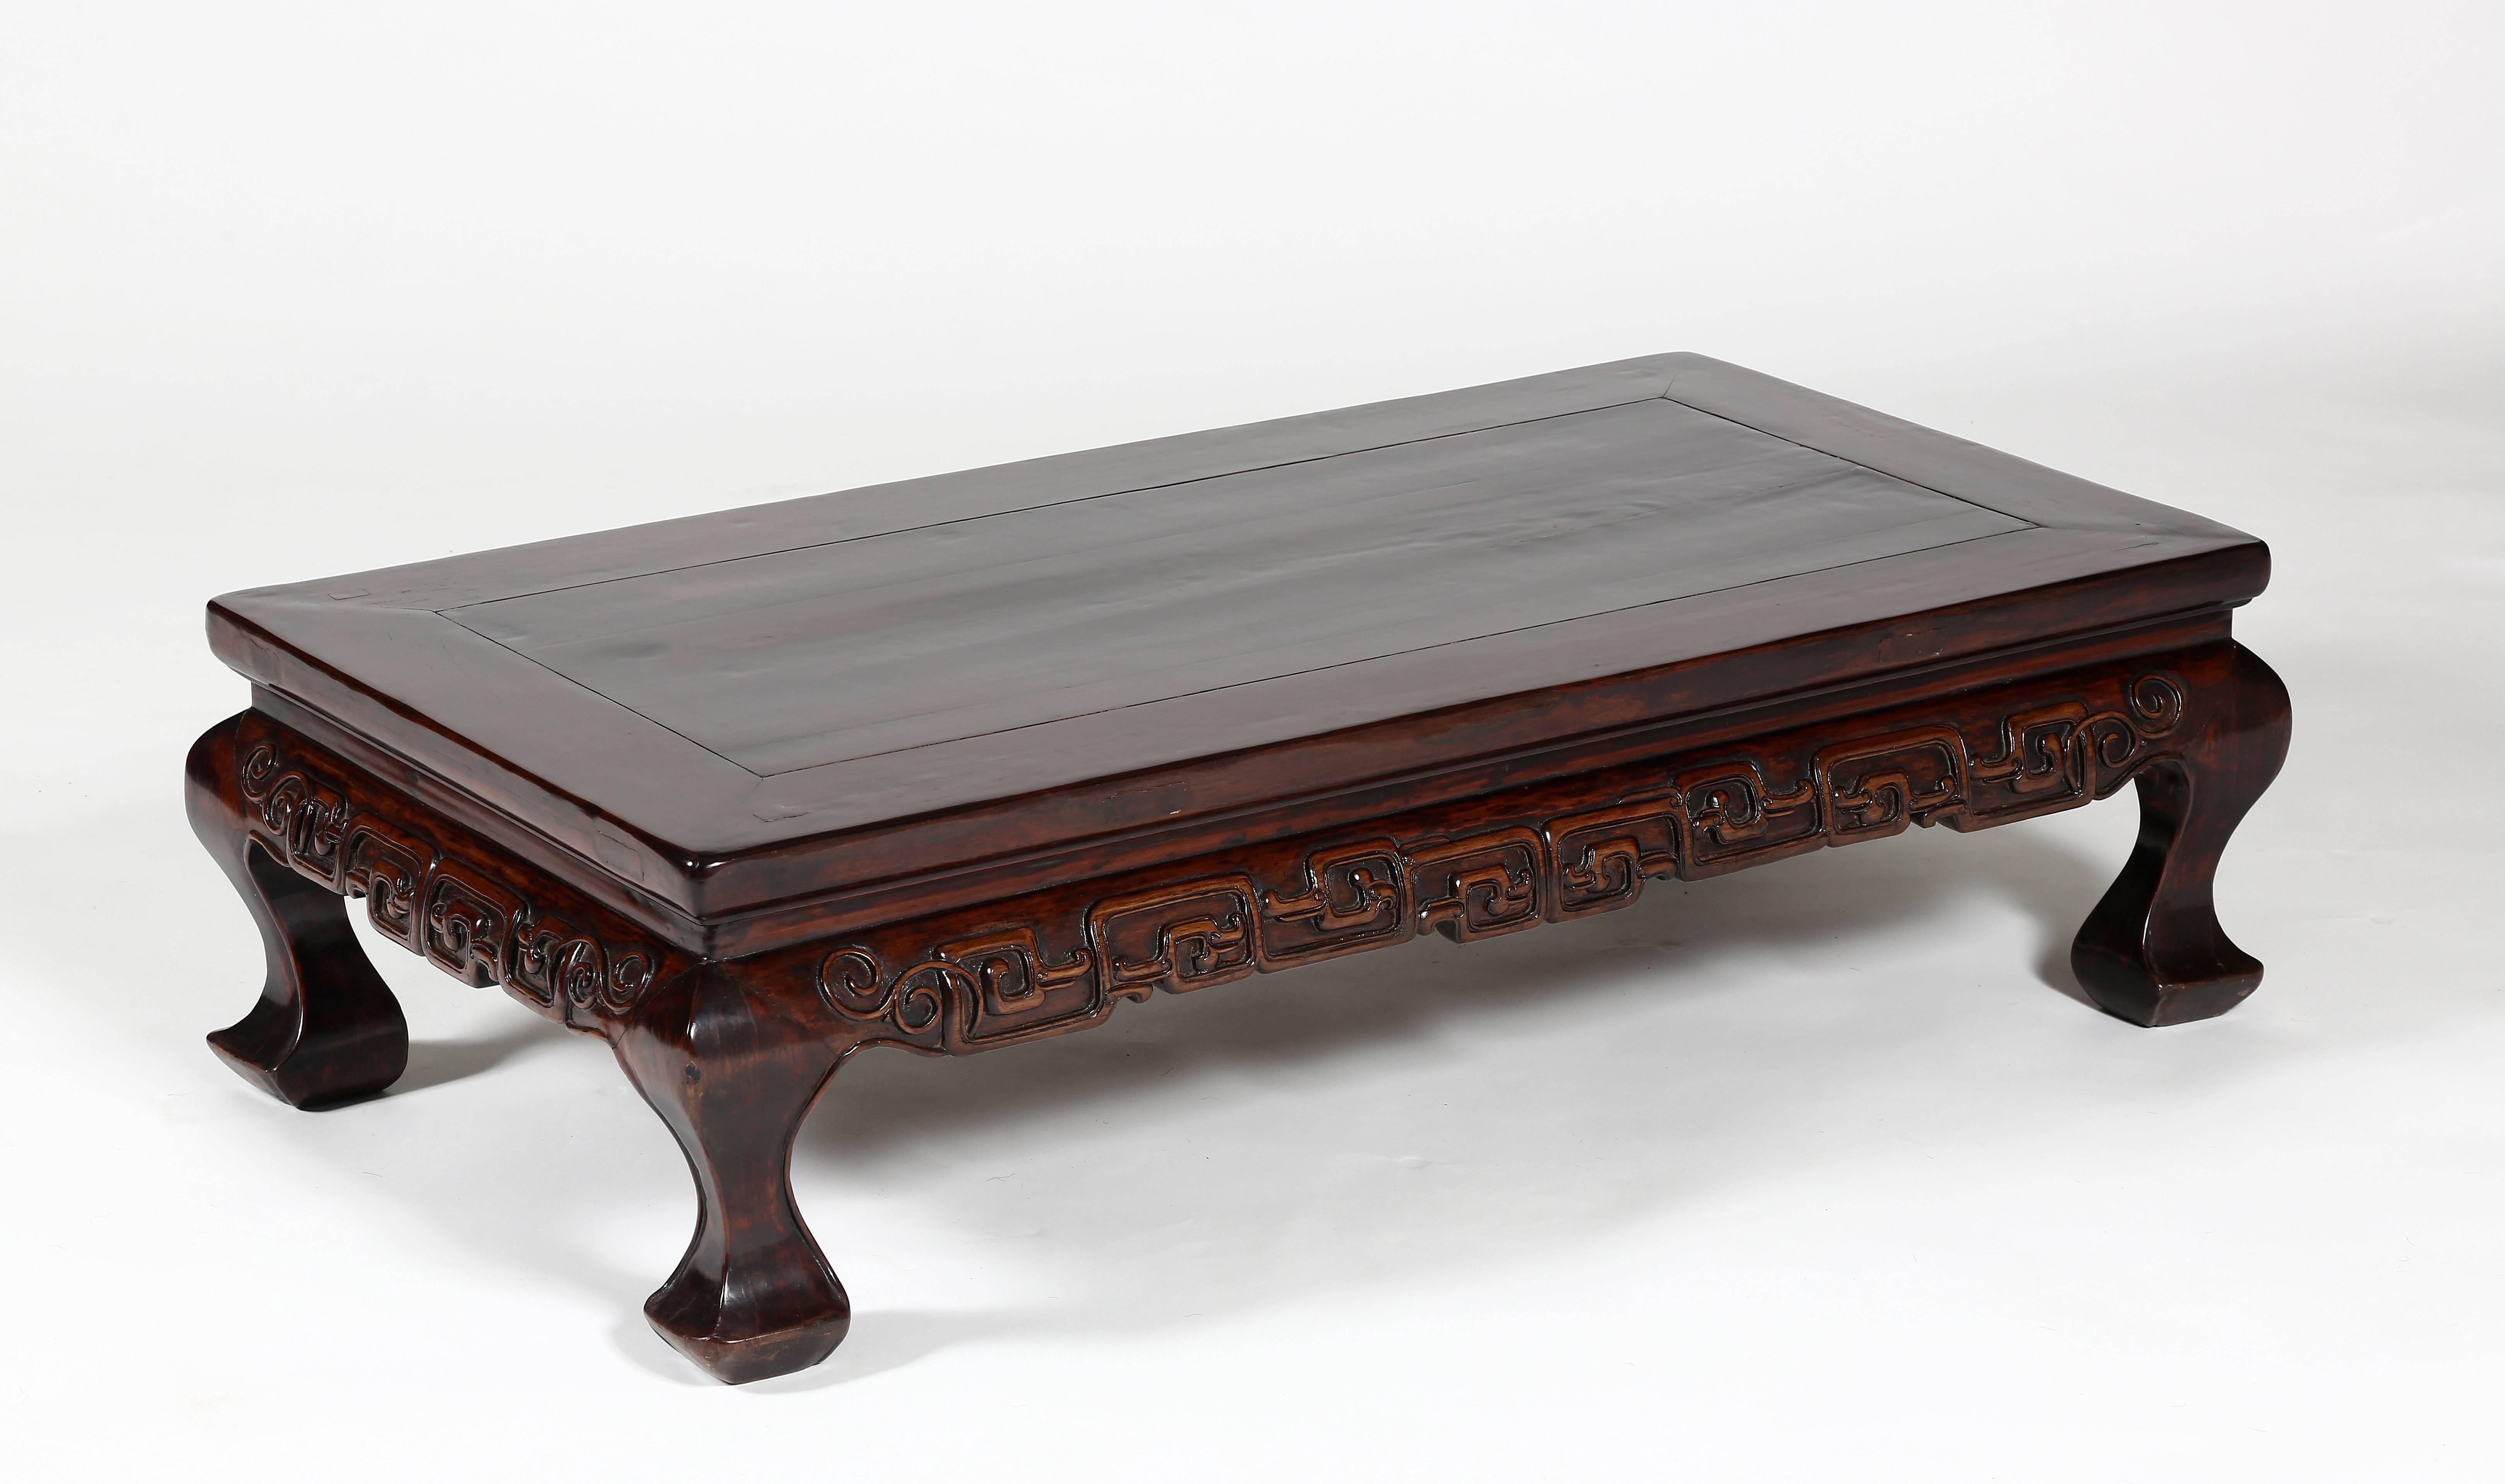 The wonderful low kang table with a floating top panel, enclosed within a frame with molded ice-plate edge, above a waist, an outward-curving apron relief-carved with rectangular scroll work, supported on cabriole legs
Lacquer with patina over